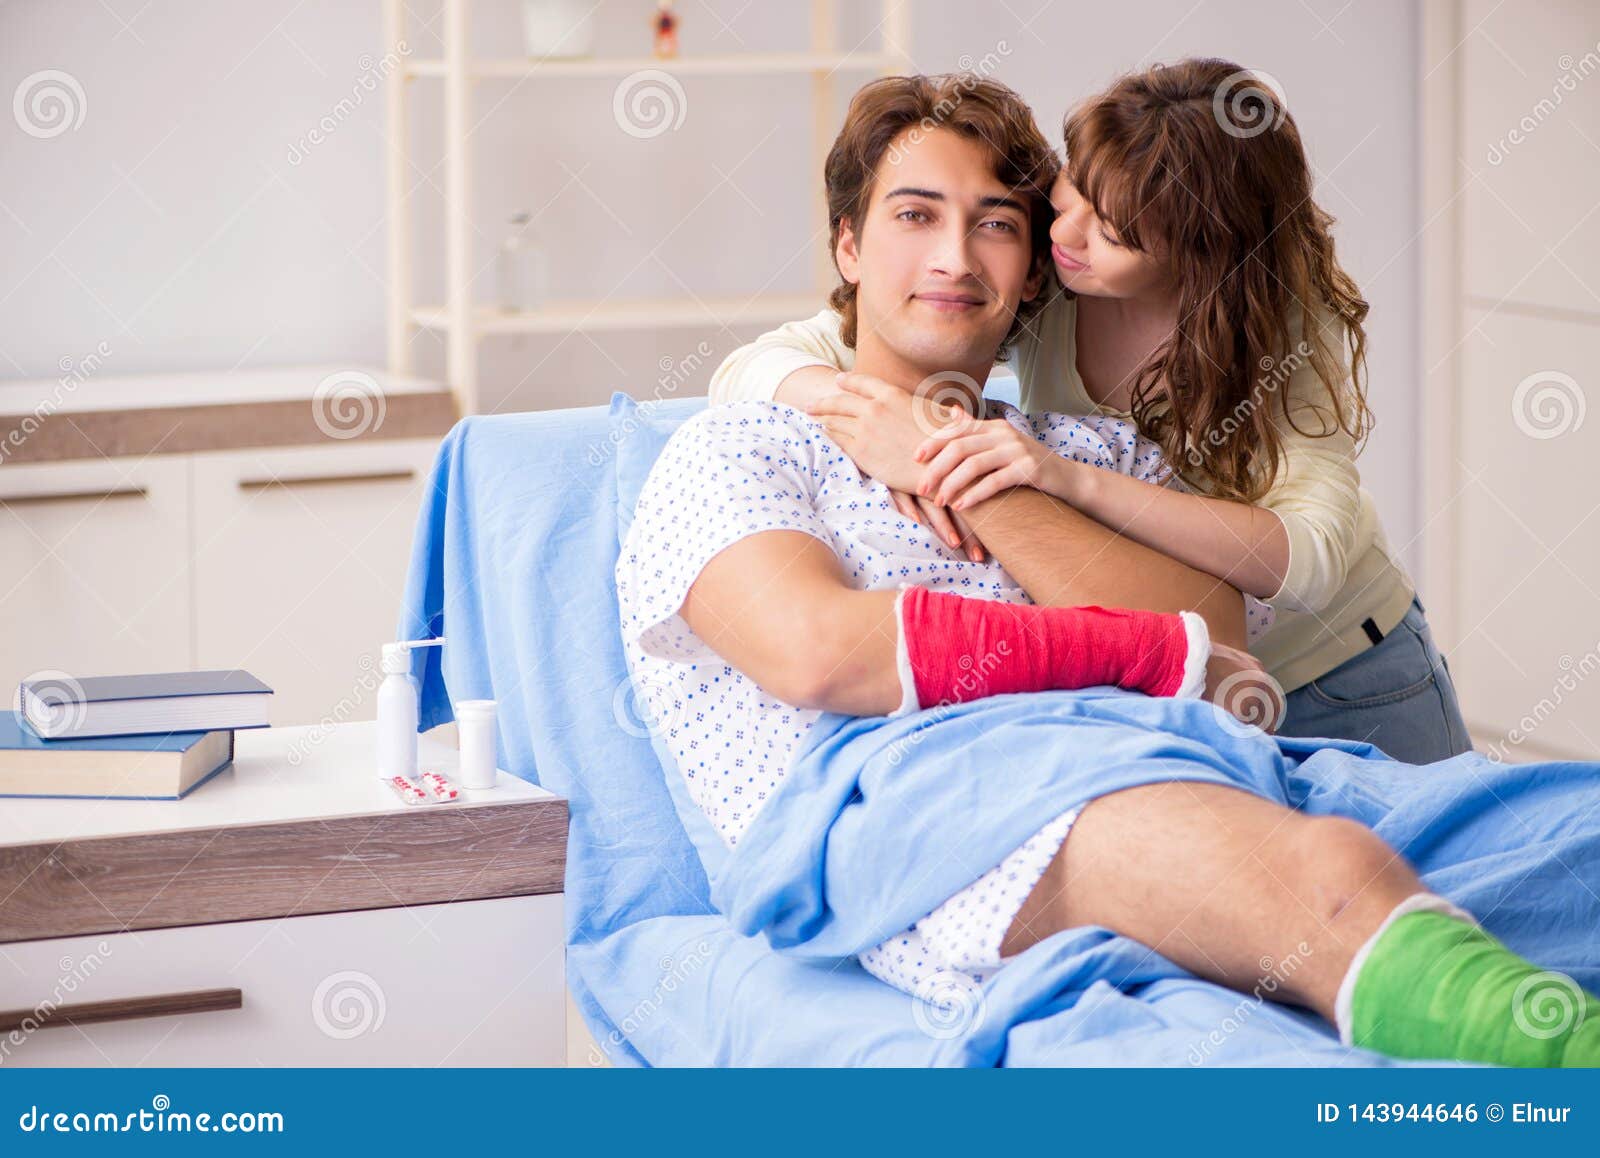 The Loving Wife Looking after Injured Husband in Hospital Stock Photo ...